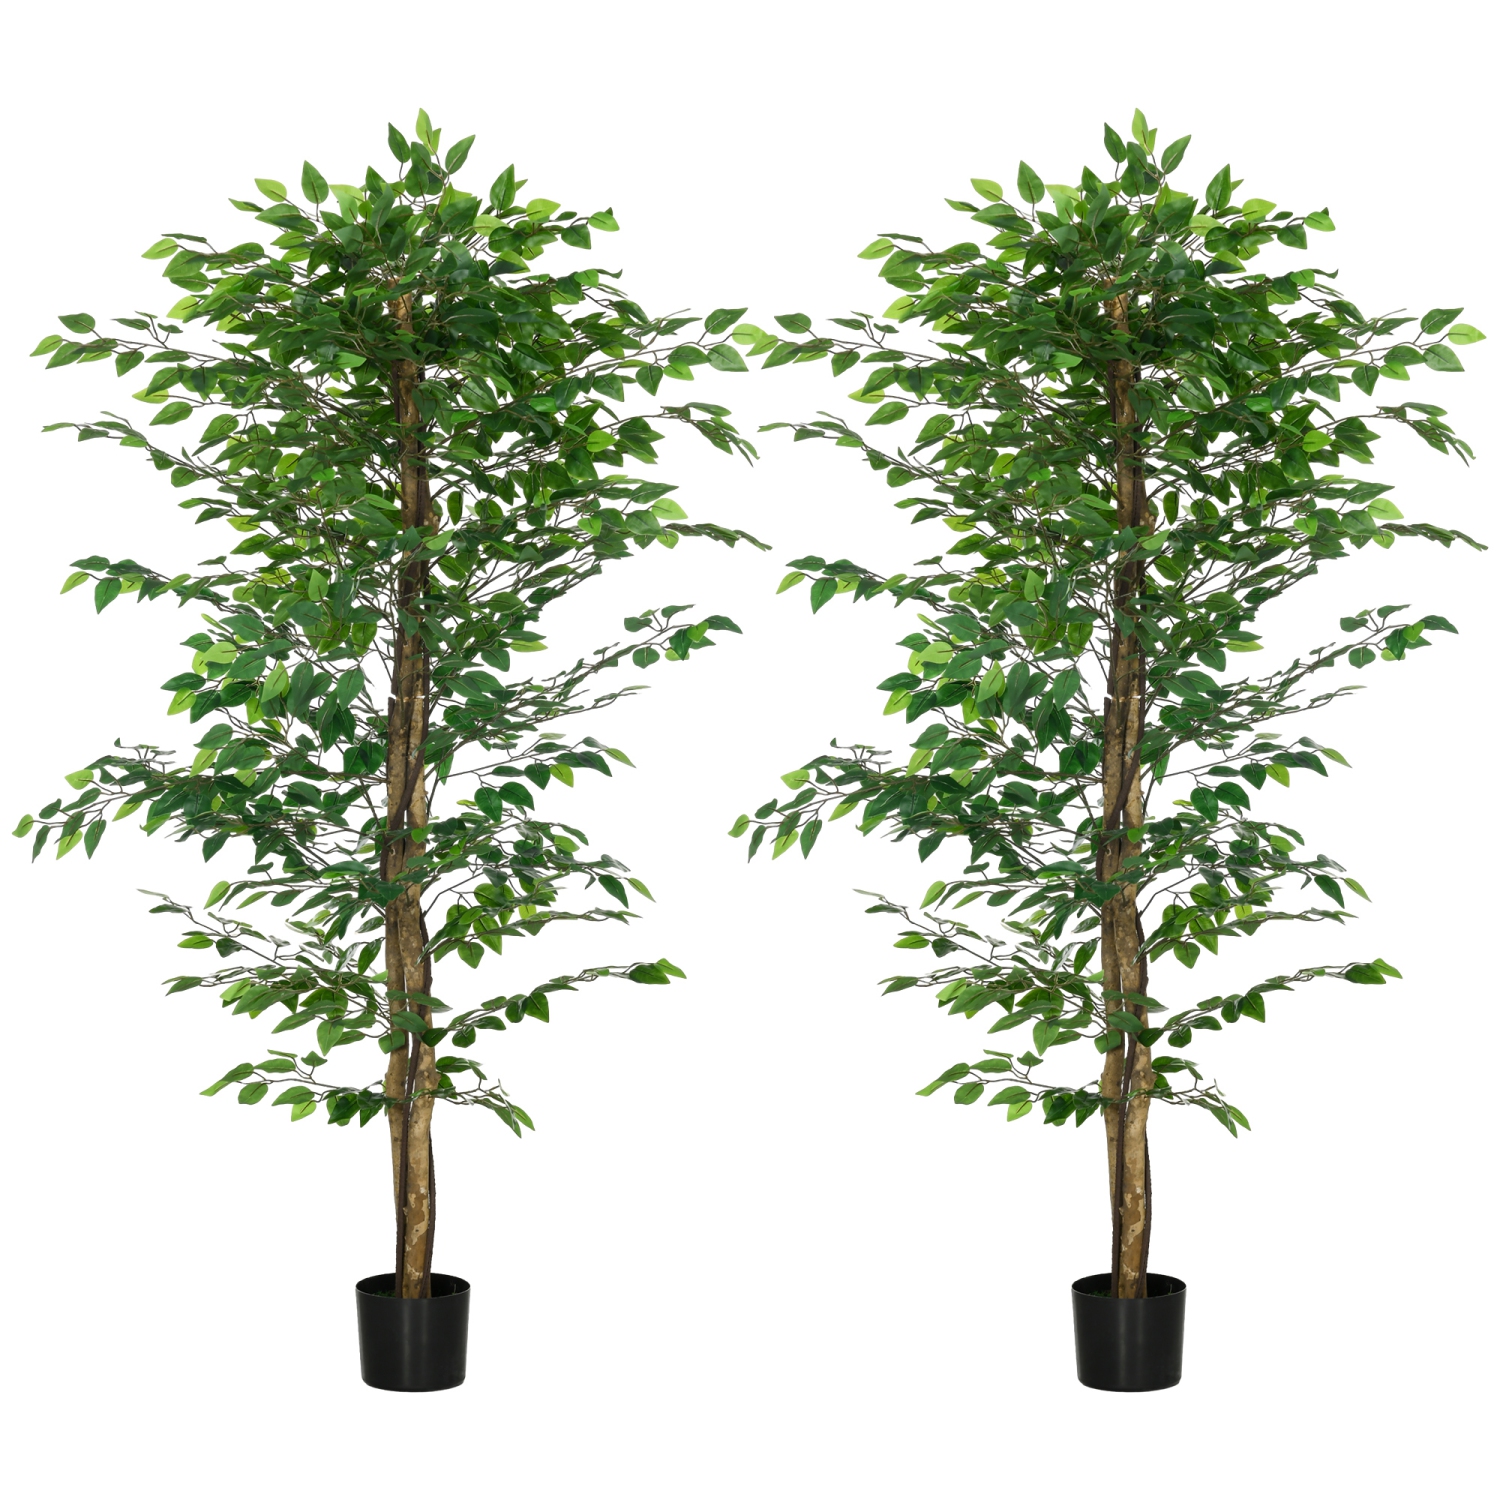 HOMCOM 6ft Set of 2 Artificial Ficus Tree with Pot, Indoor Outdoor Fake Plants for Home Office Living Room Decor